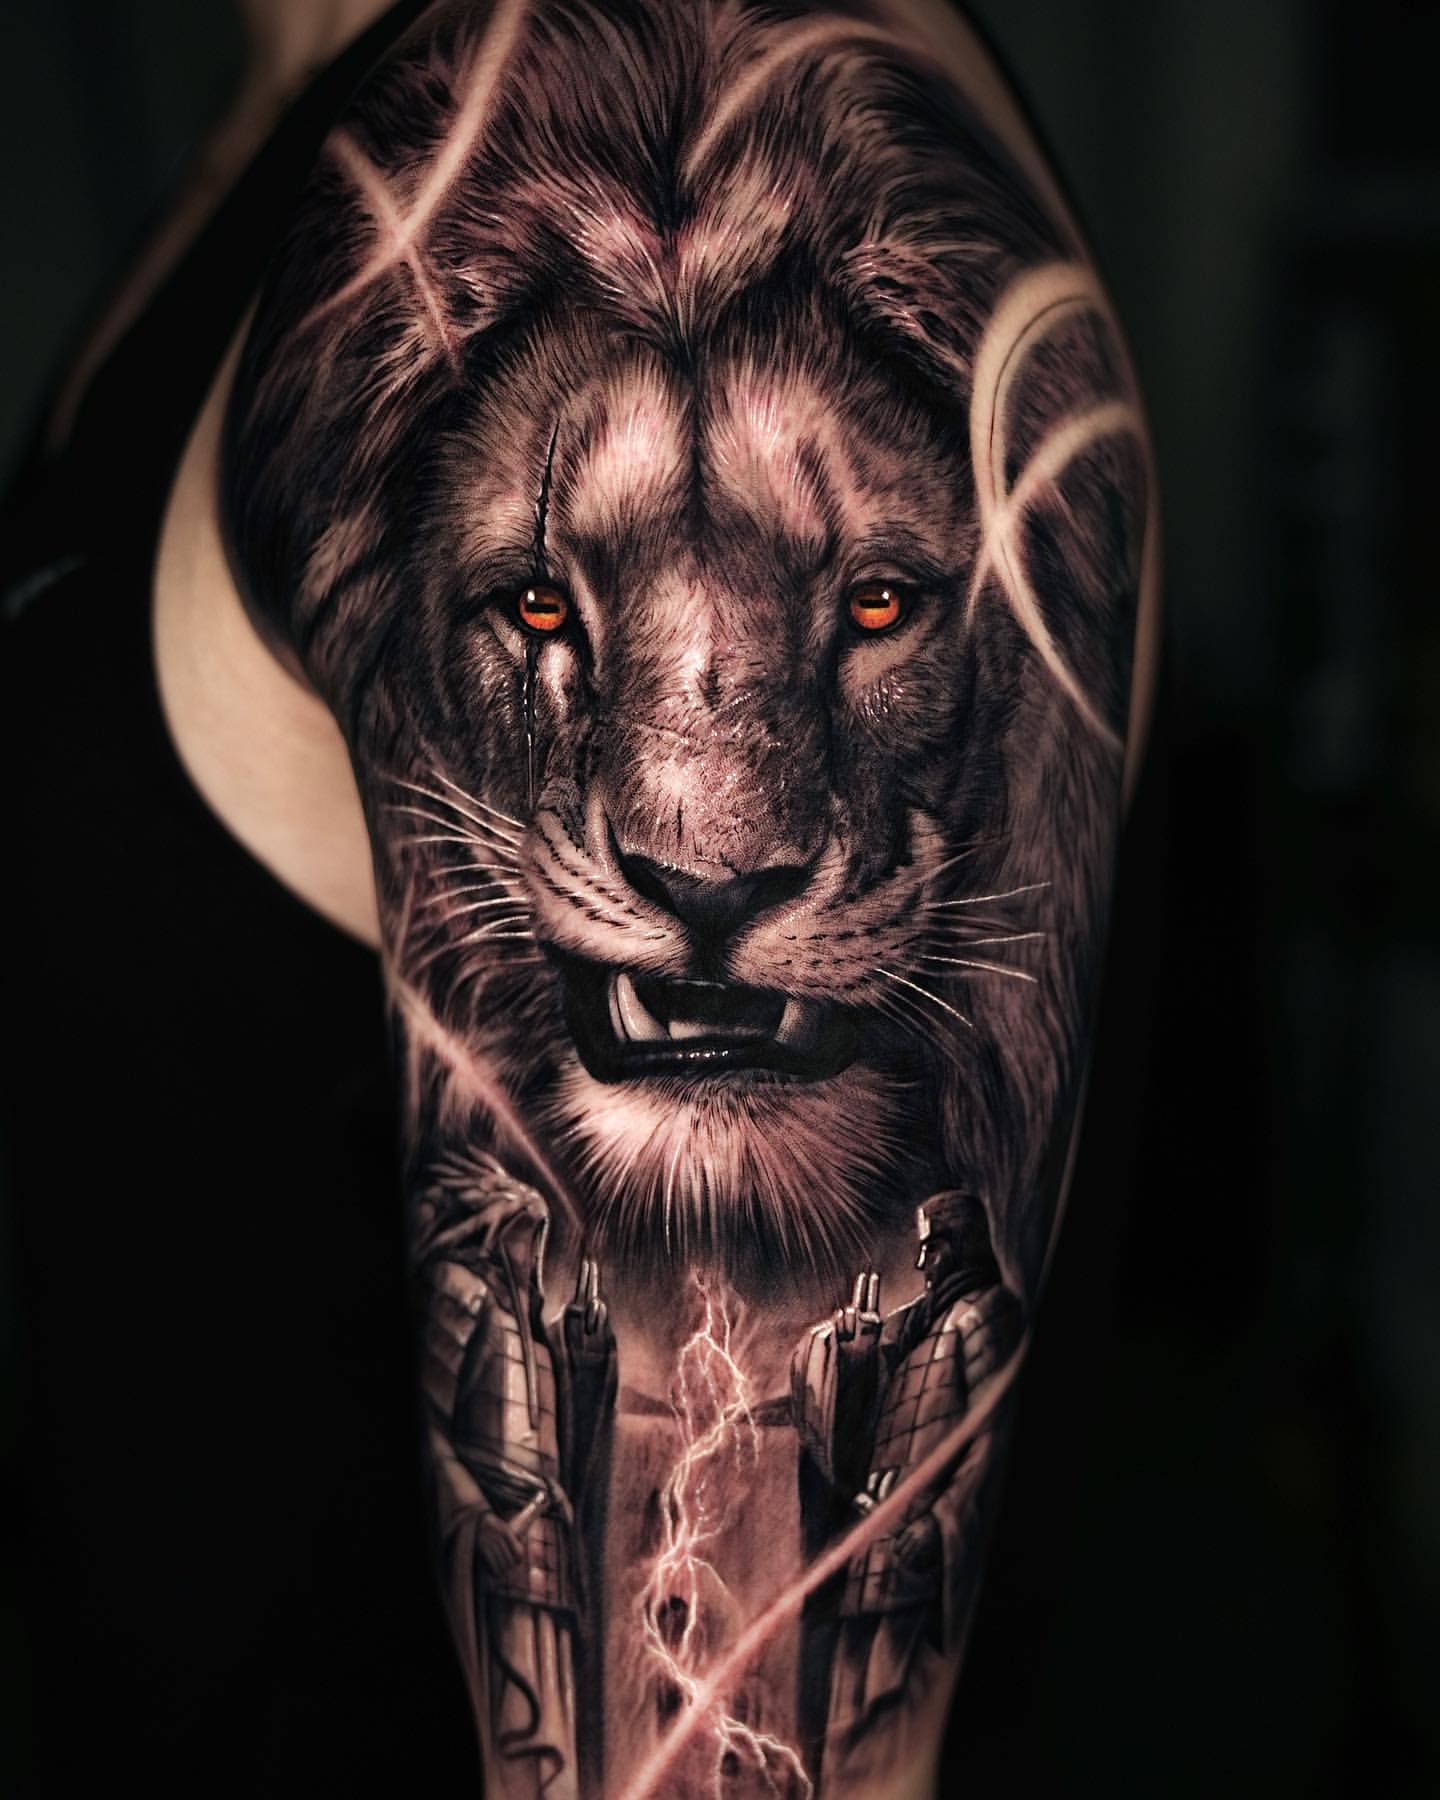 Black and White Lion Head Profile Best Temporary Tattoos| WannaBeInk.com